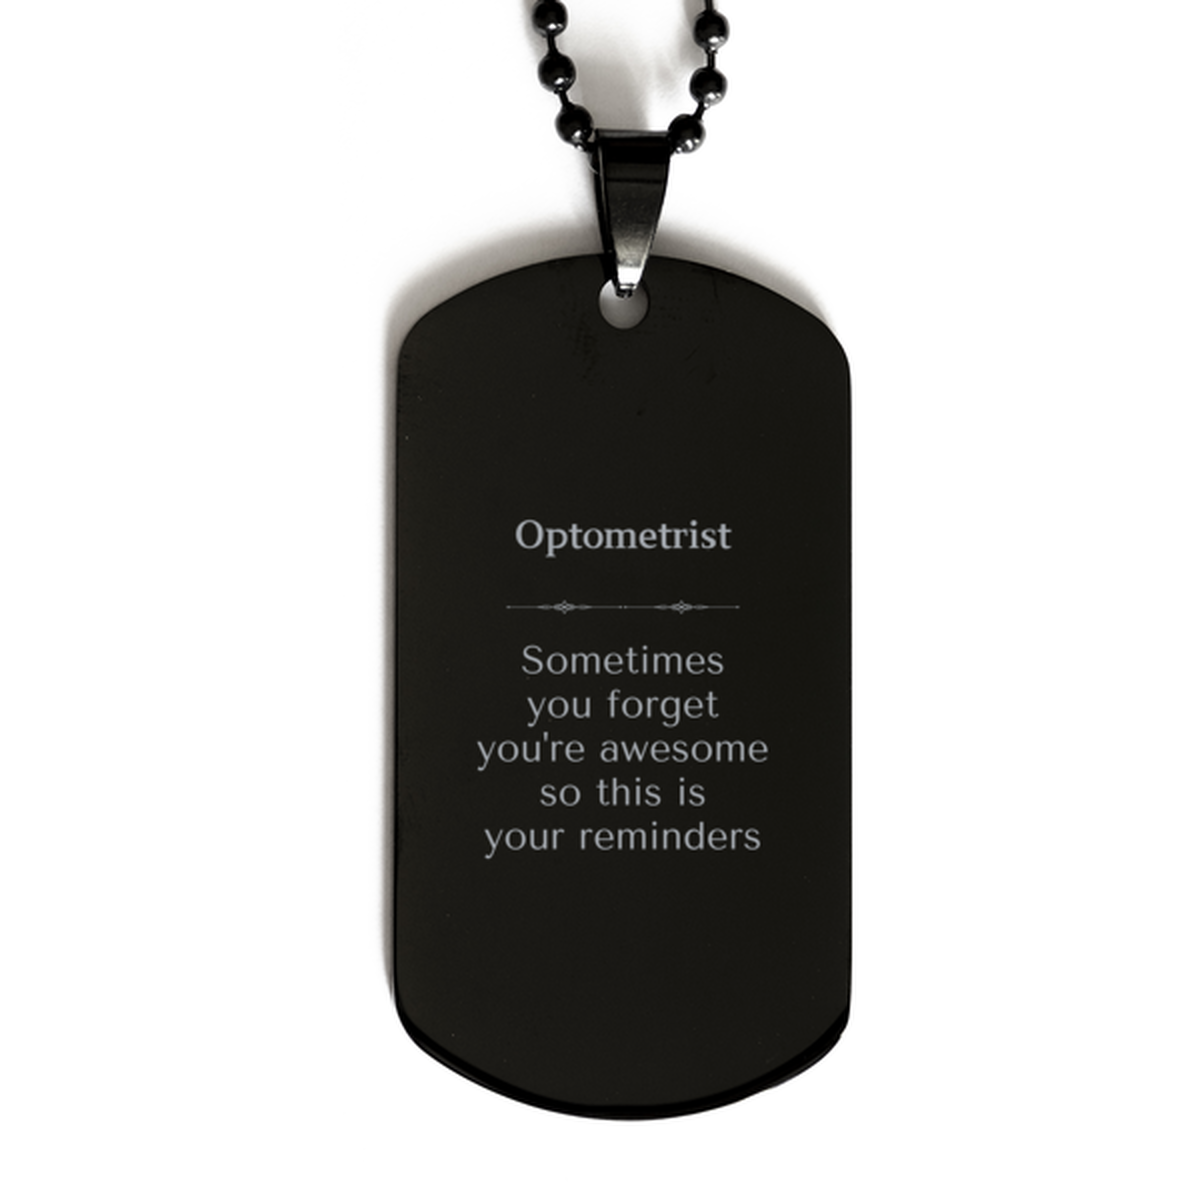 Sentimental Optometrist Black Dog Tag, Optometrist Sometimes you forget you're awesome so this is your reminders, Graduation Christmas Birthday Gifts for Optometrist, Men, Women, Coworkers